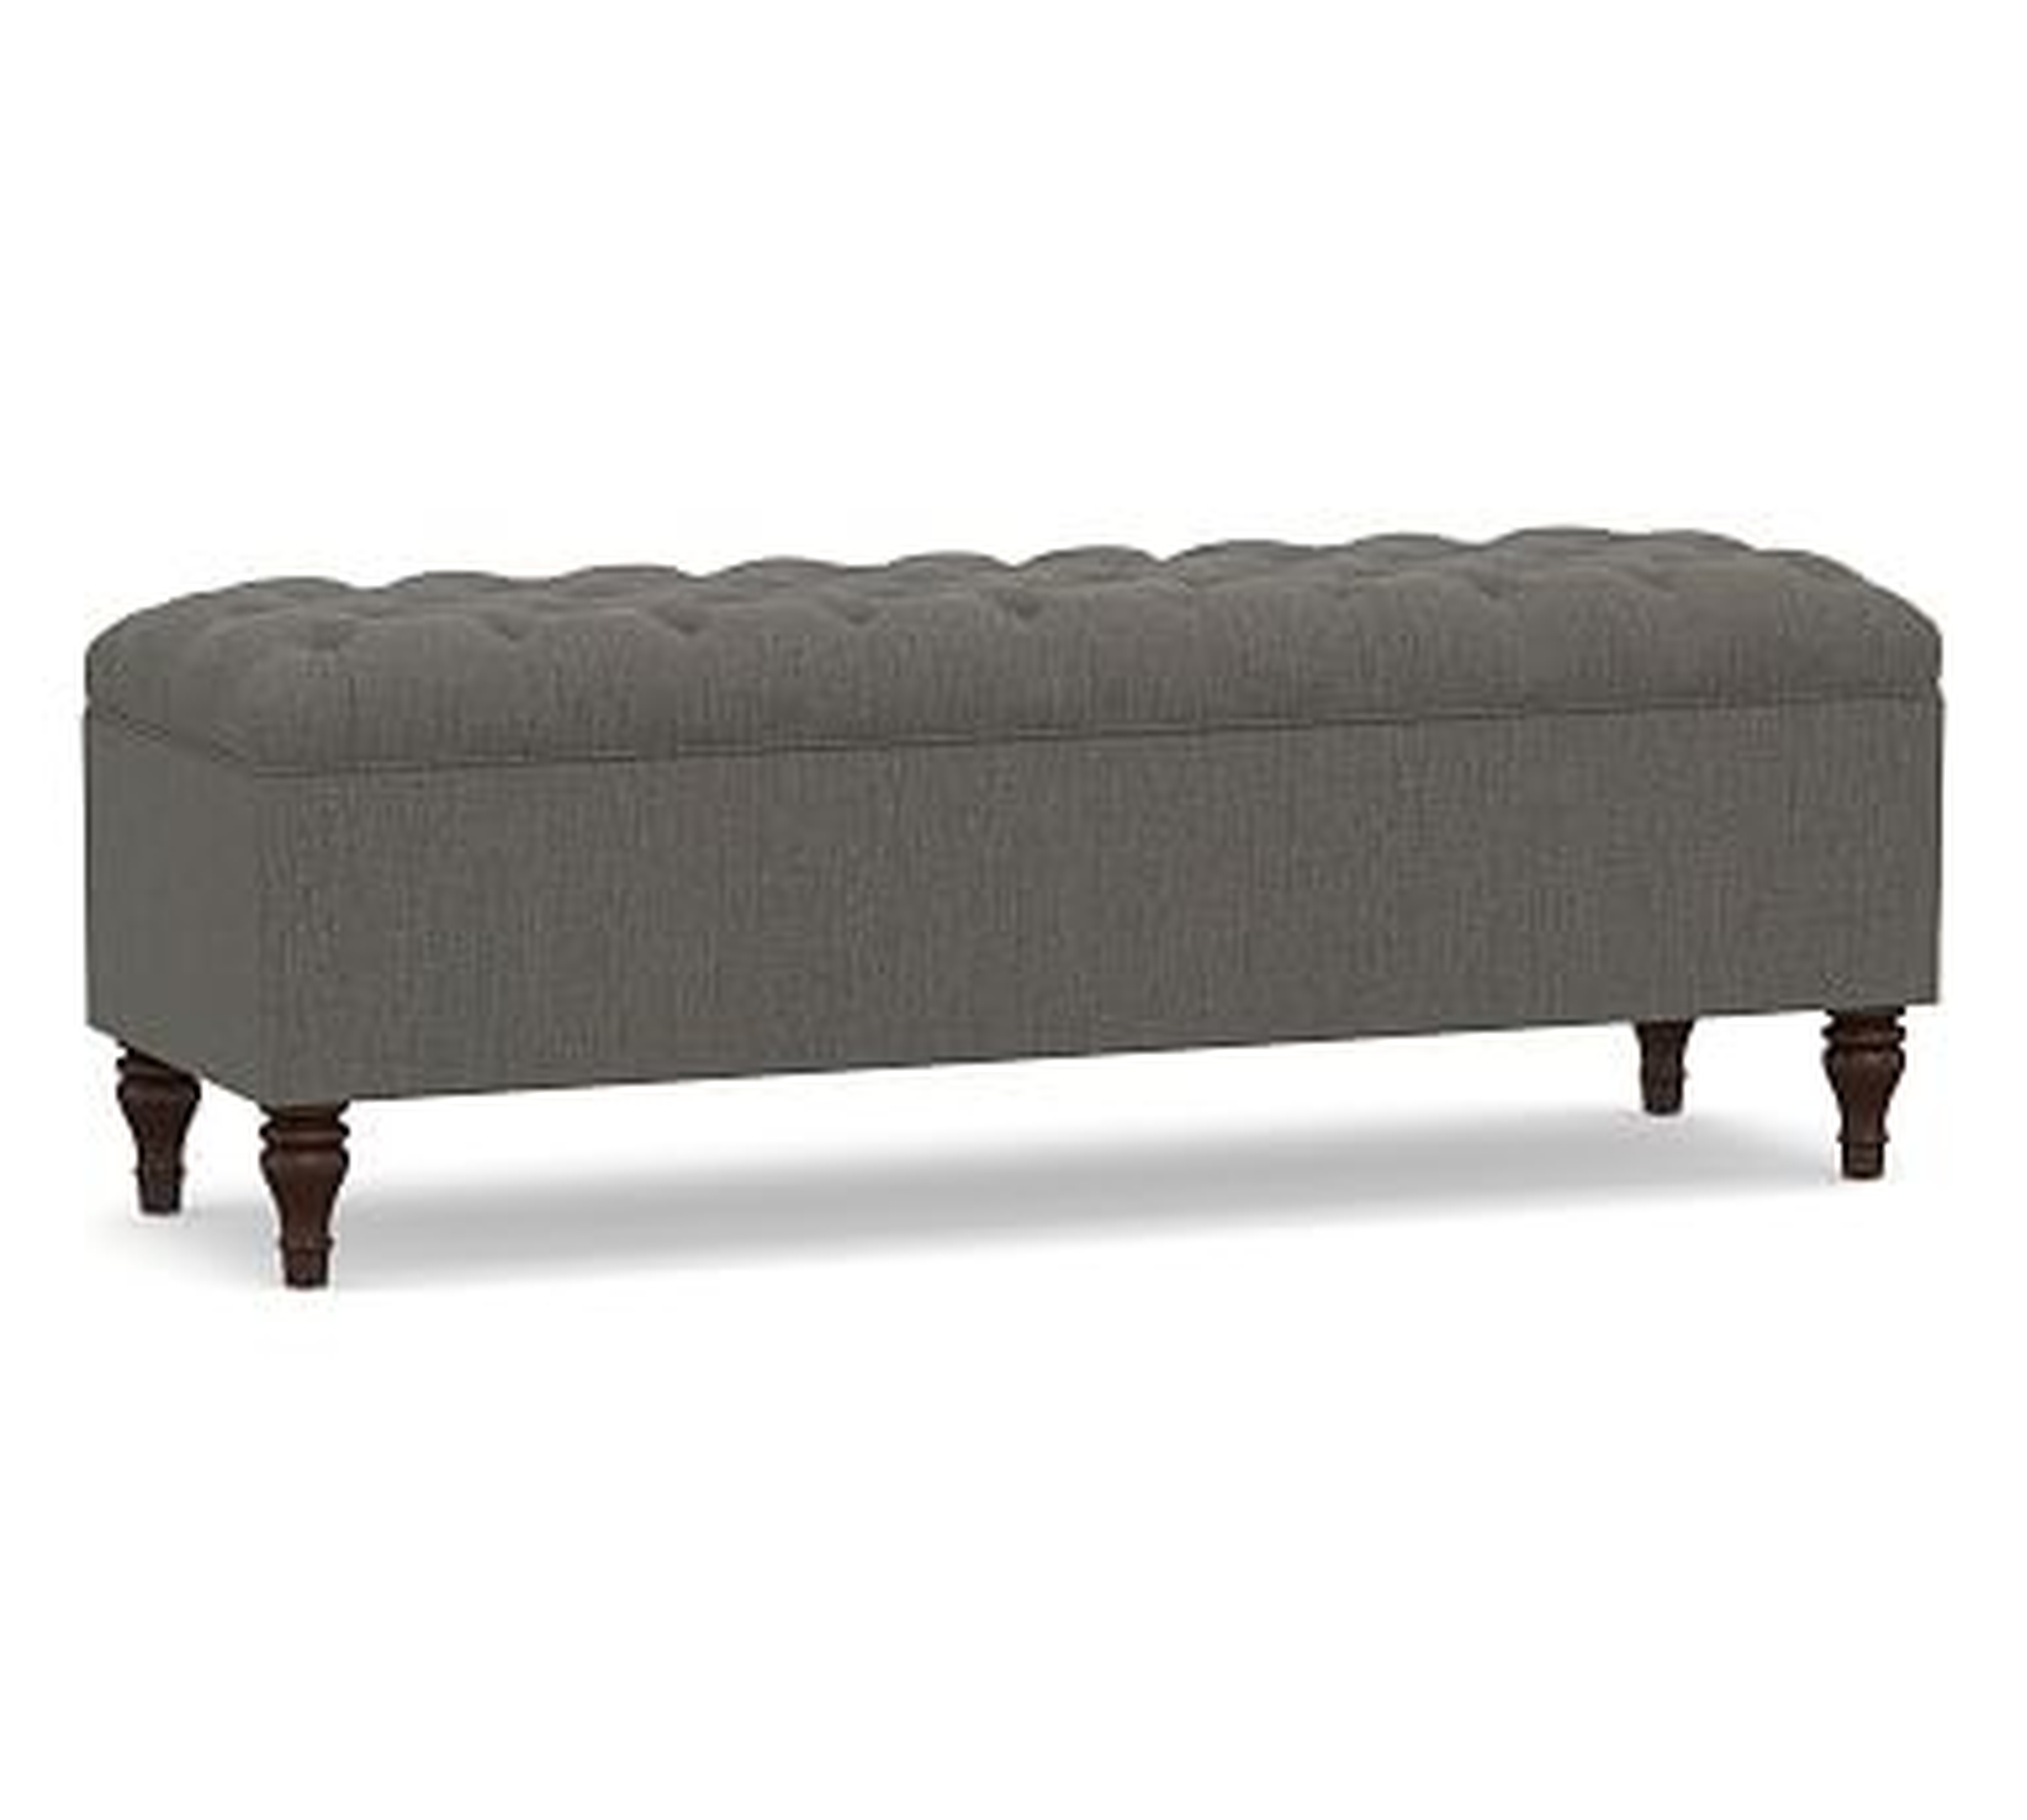 Lorraine Tufted Upholstered Queen Storage Bench, Chenille Basketweave Charcoal - Pottery Barn